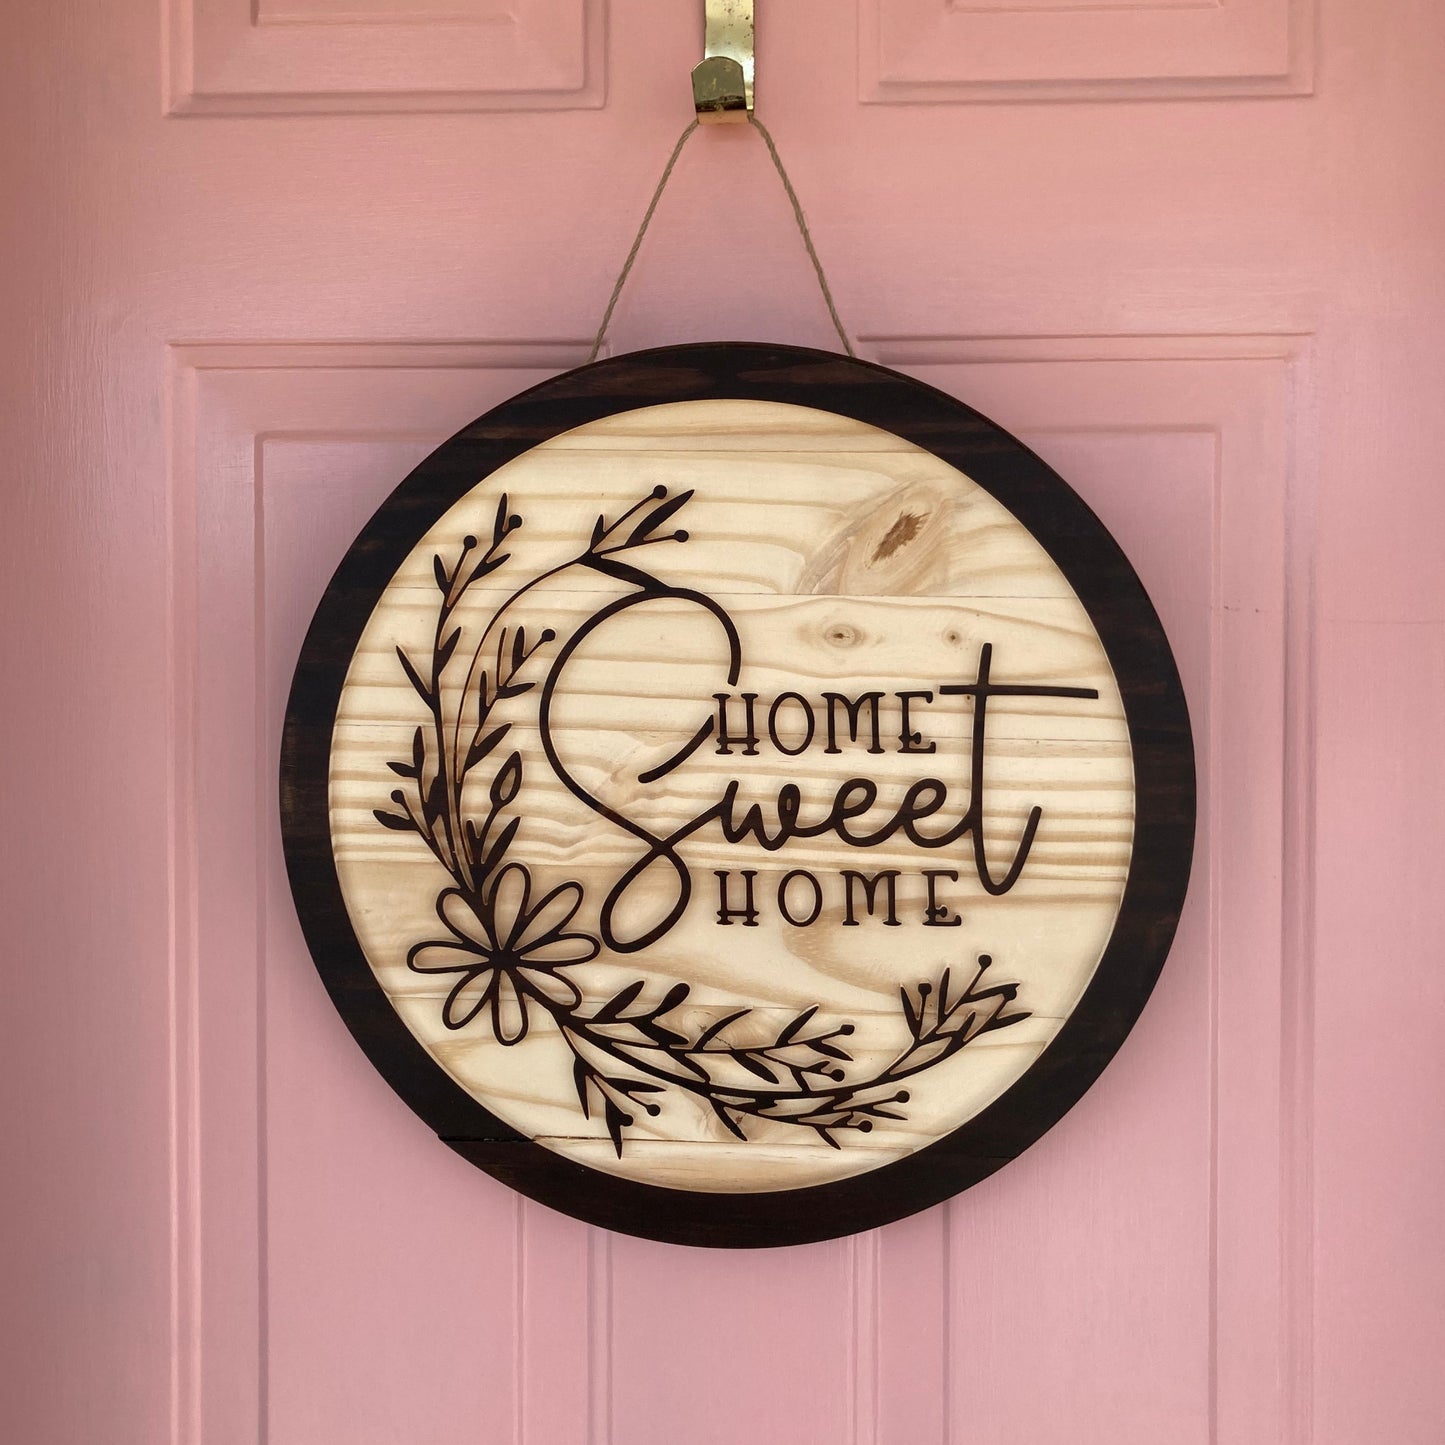 Home Sweet Home Round Wood Sign